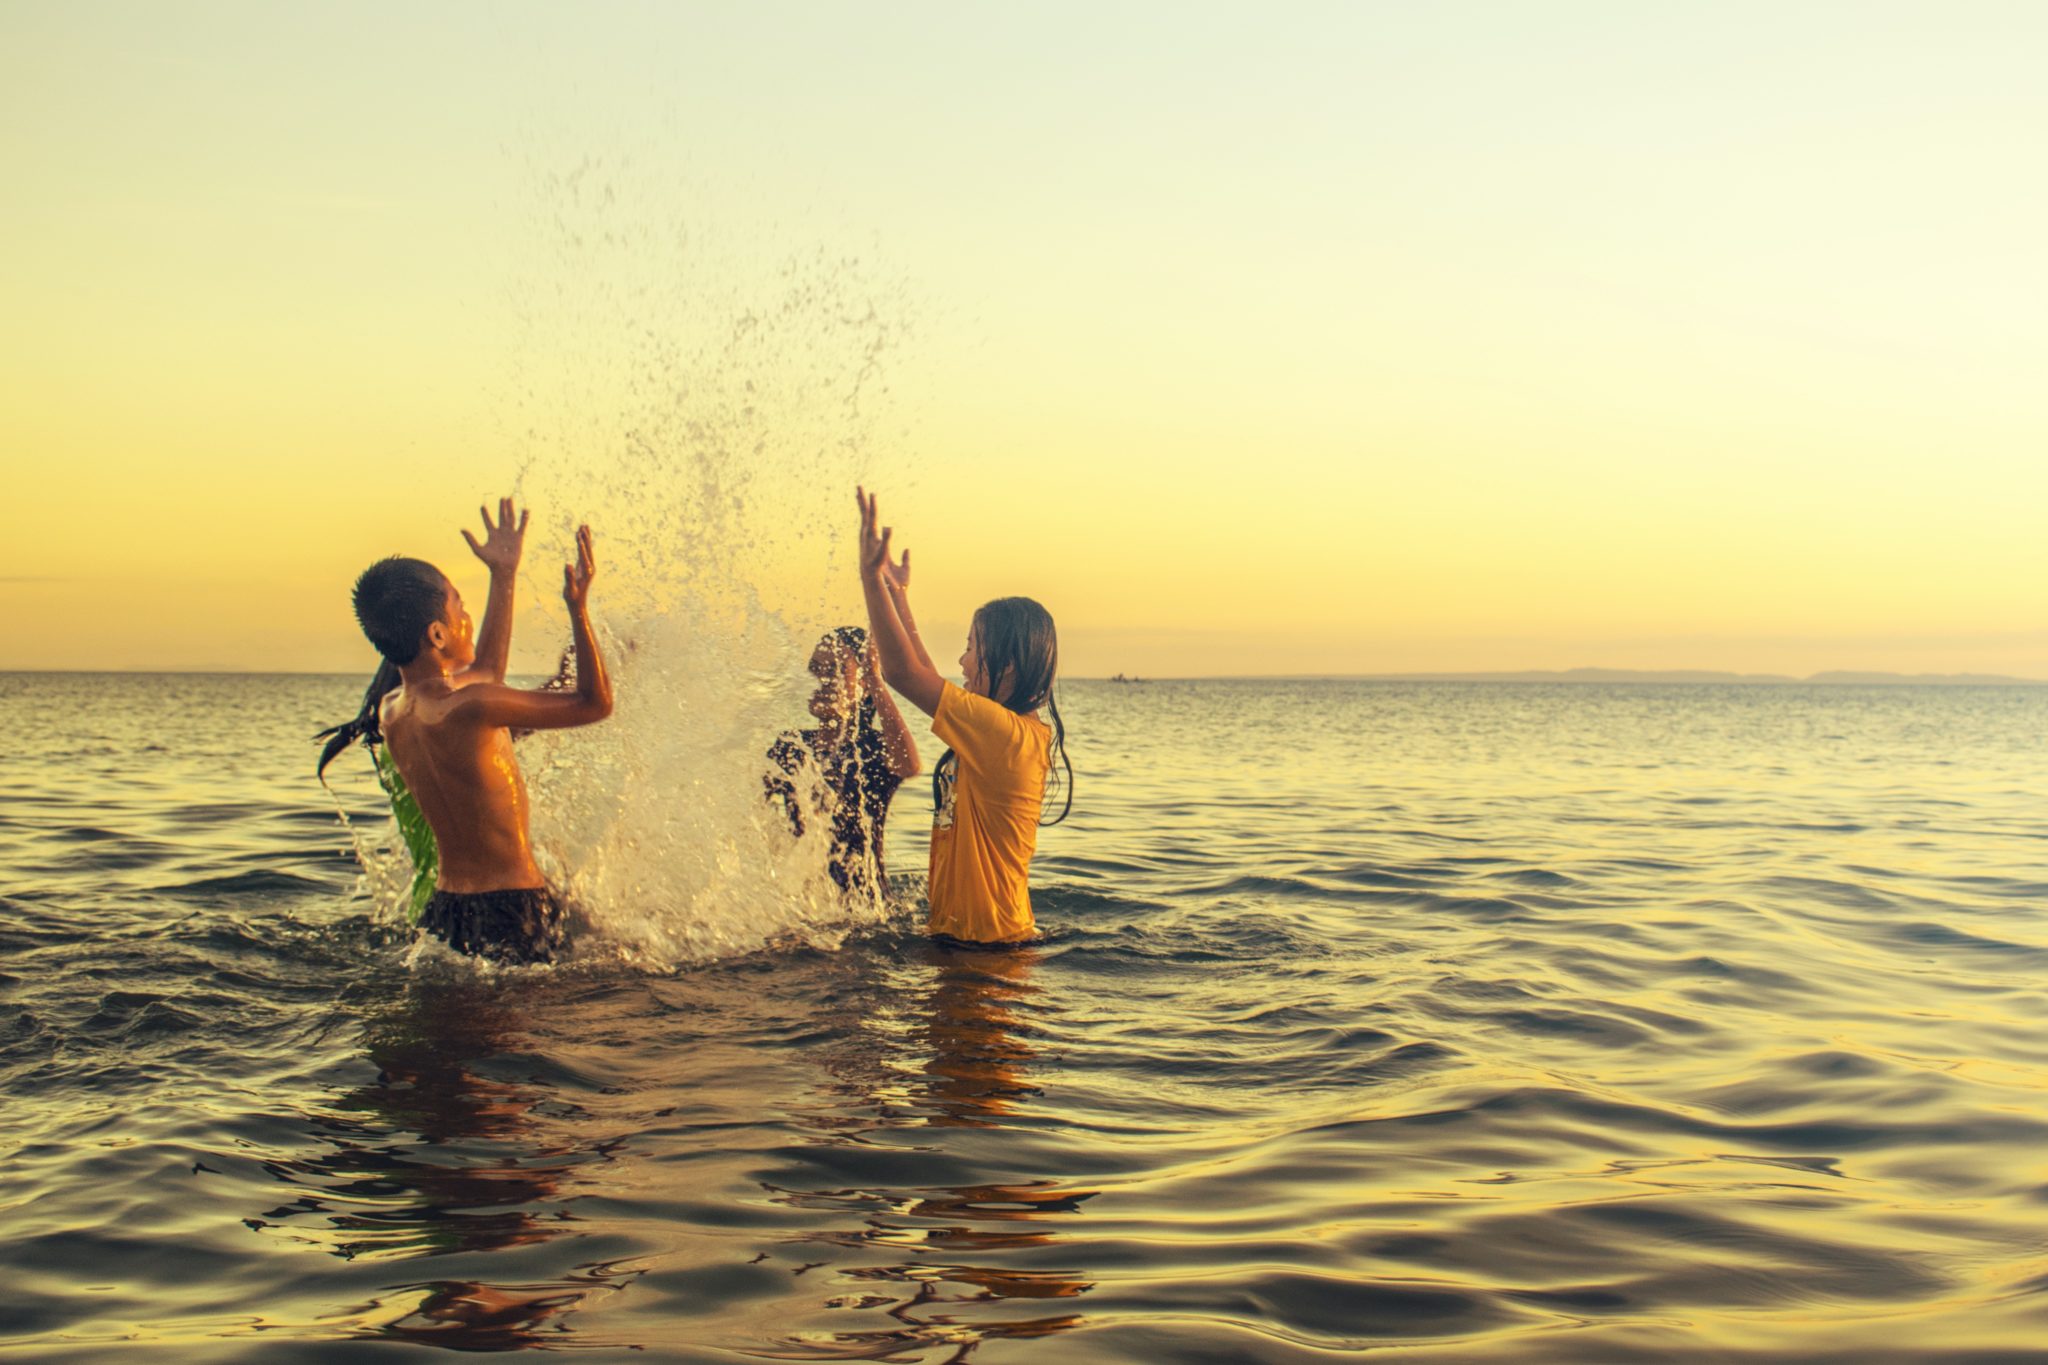 A group of children face each other in a circle and splash in the ocean water, their arms raised.